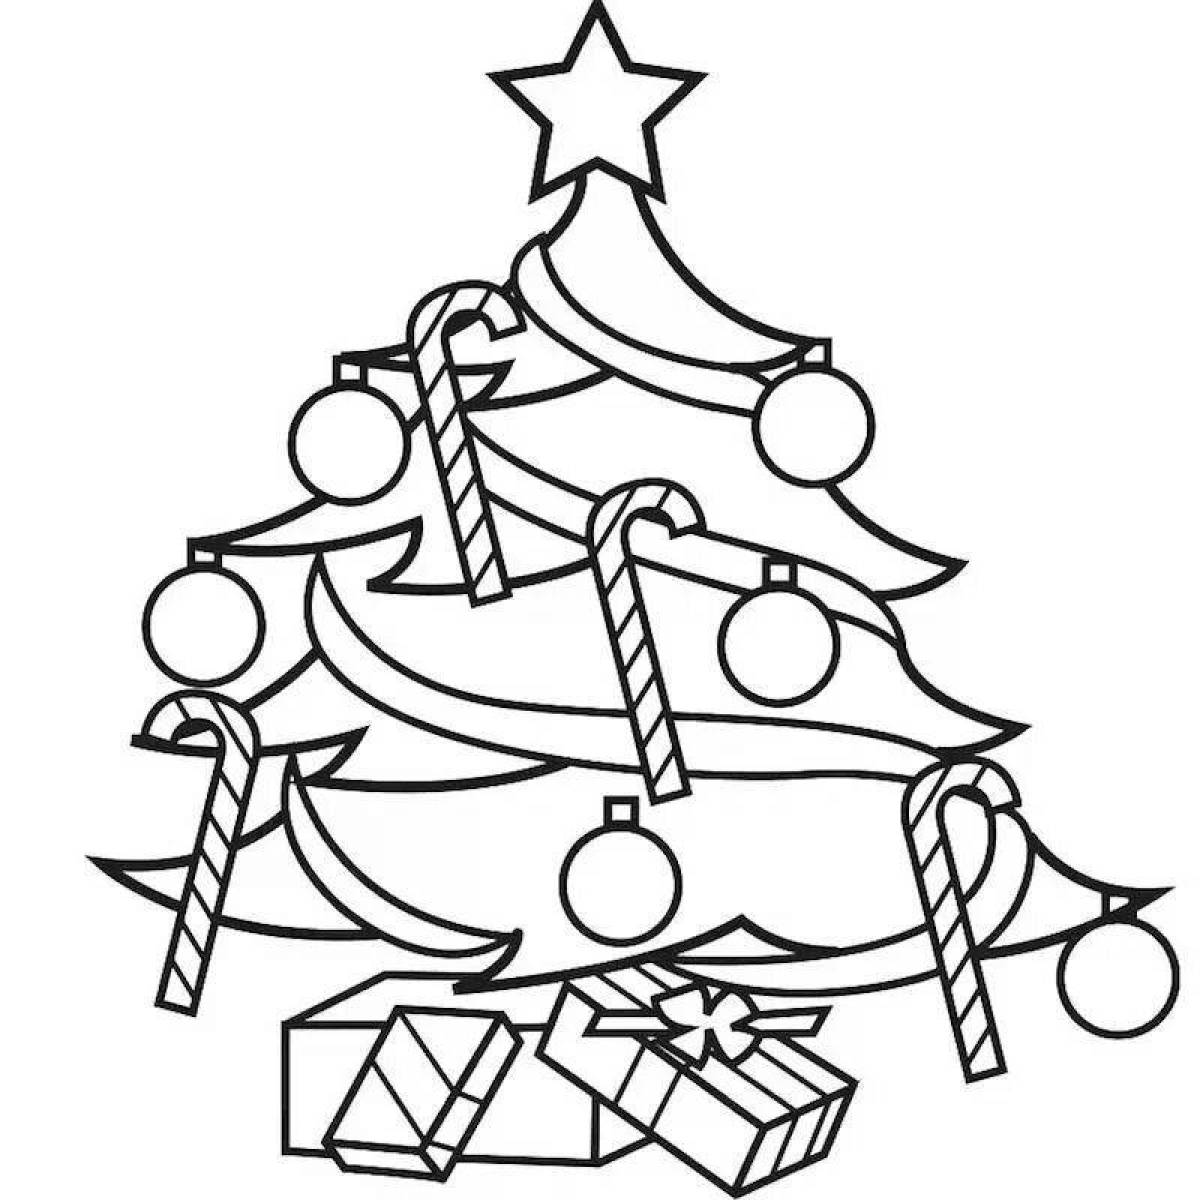 Coloring book dazzling Christmas tree for kids